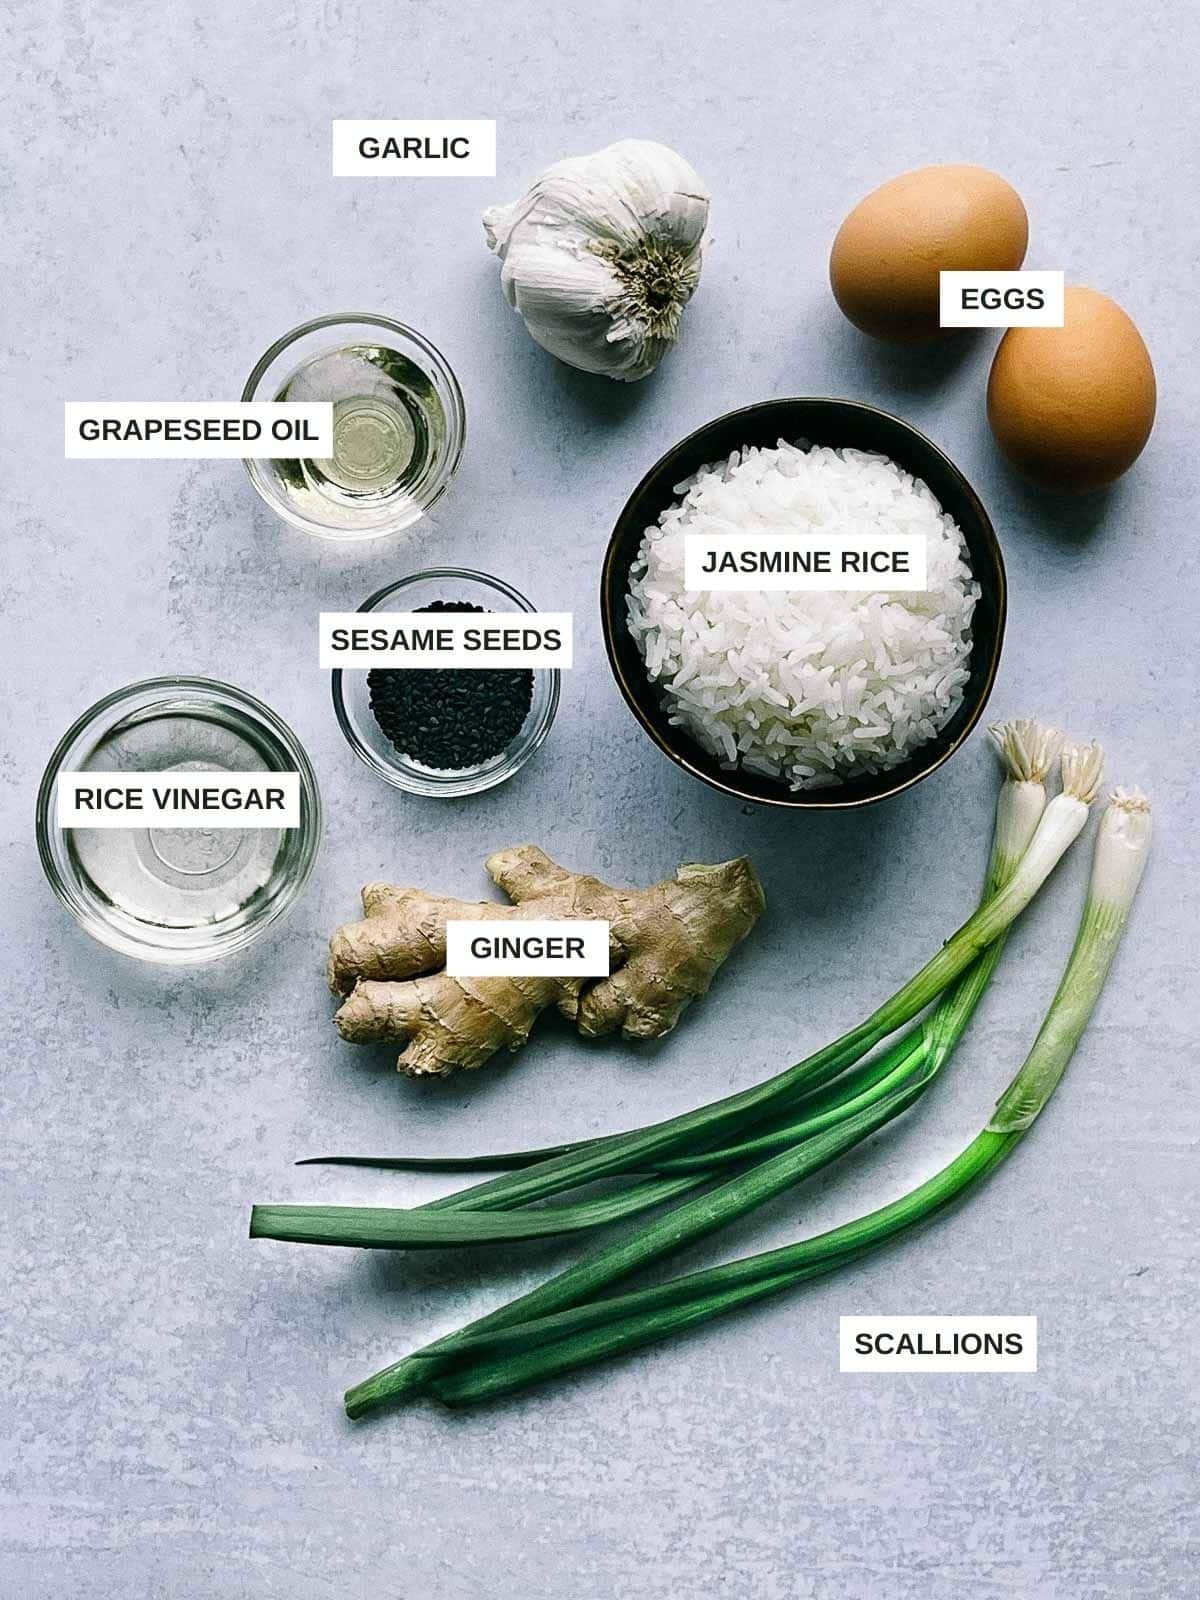 Labeled ingredients for making crispy rice with ginger and scallions placed on top of a gray surface.